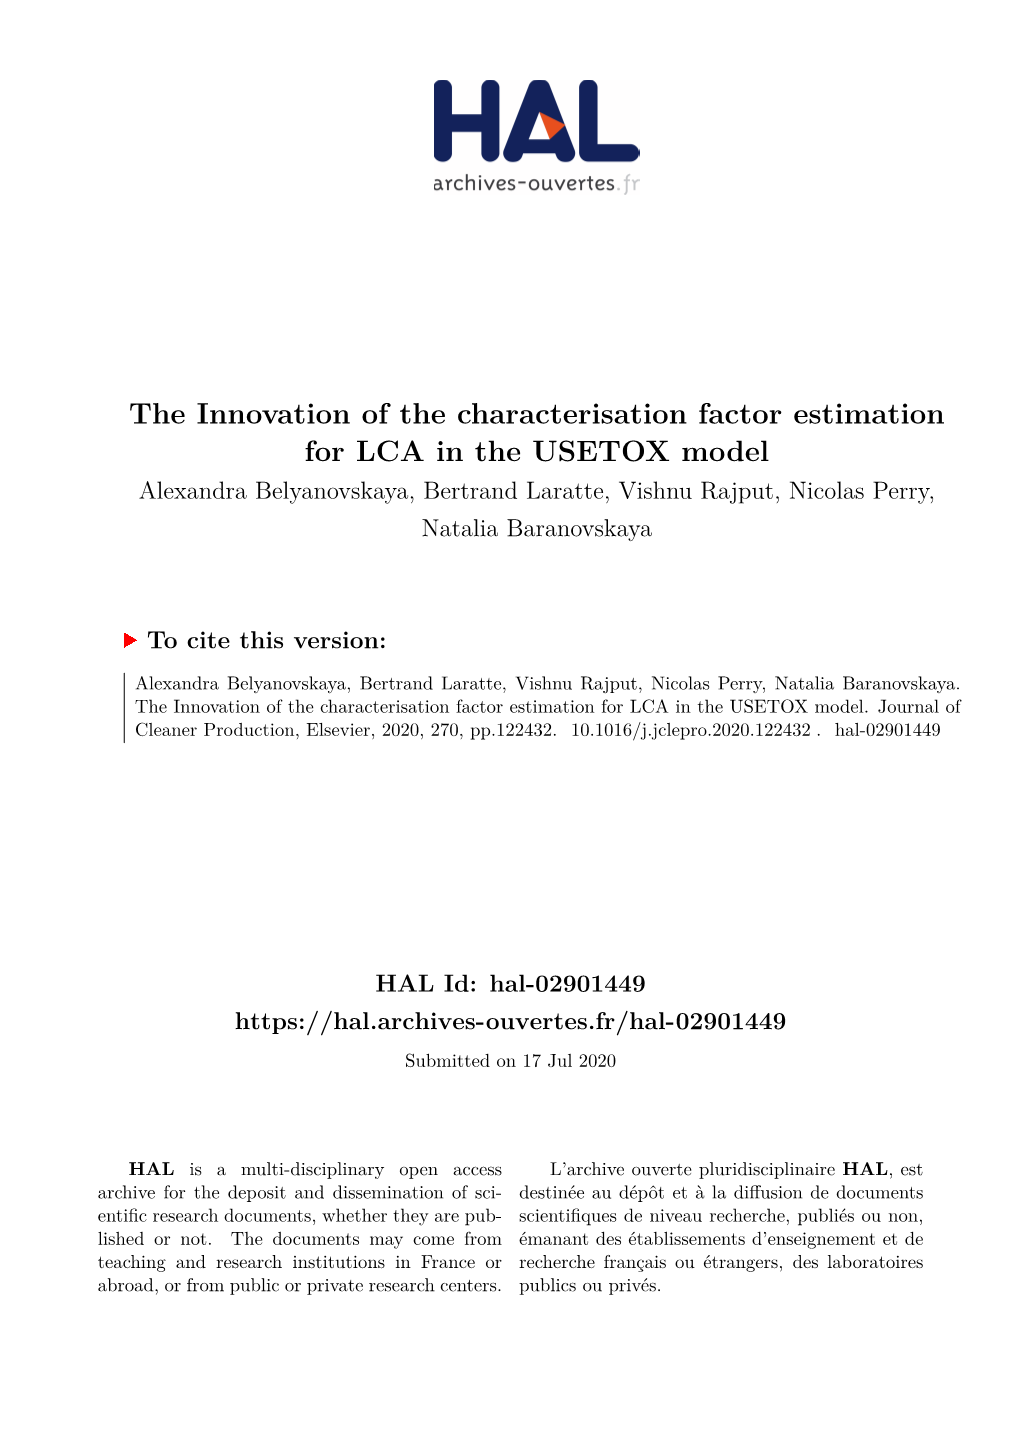 The Innovation of the Characterisation Factor Estimation for LCA in The